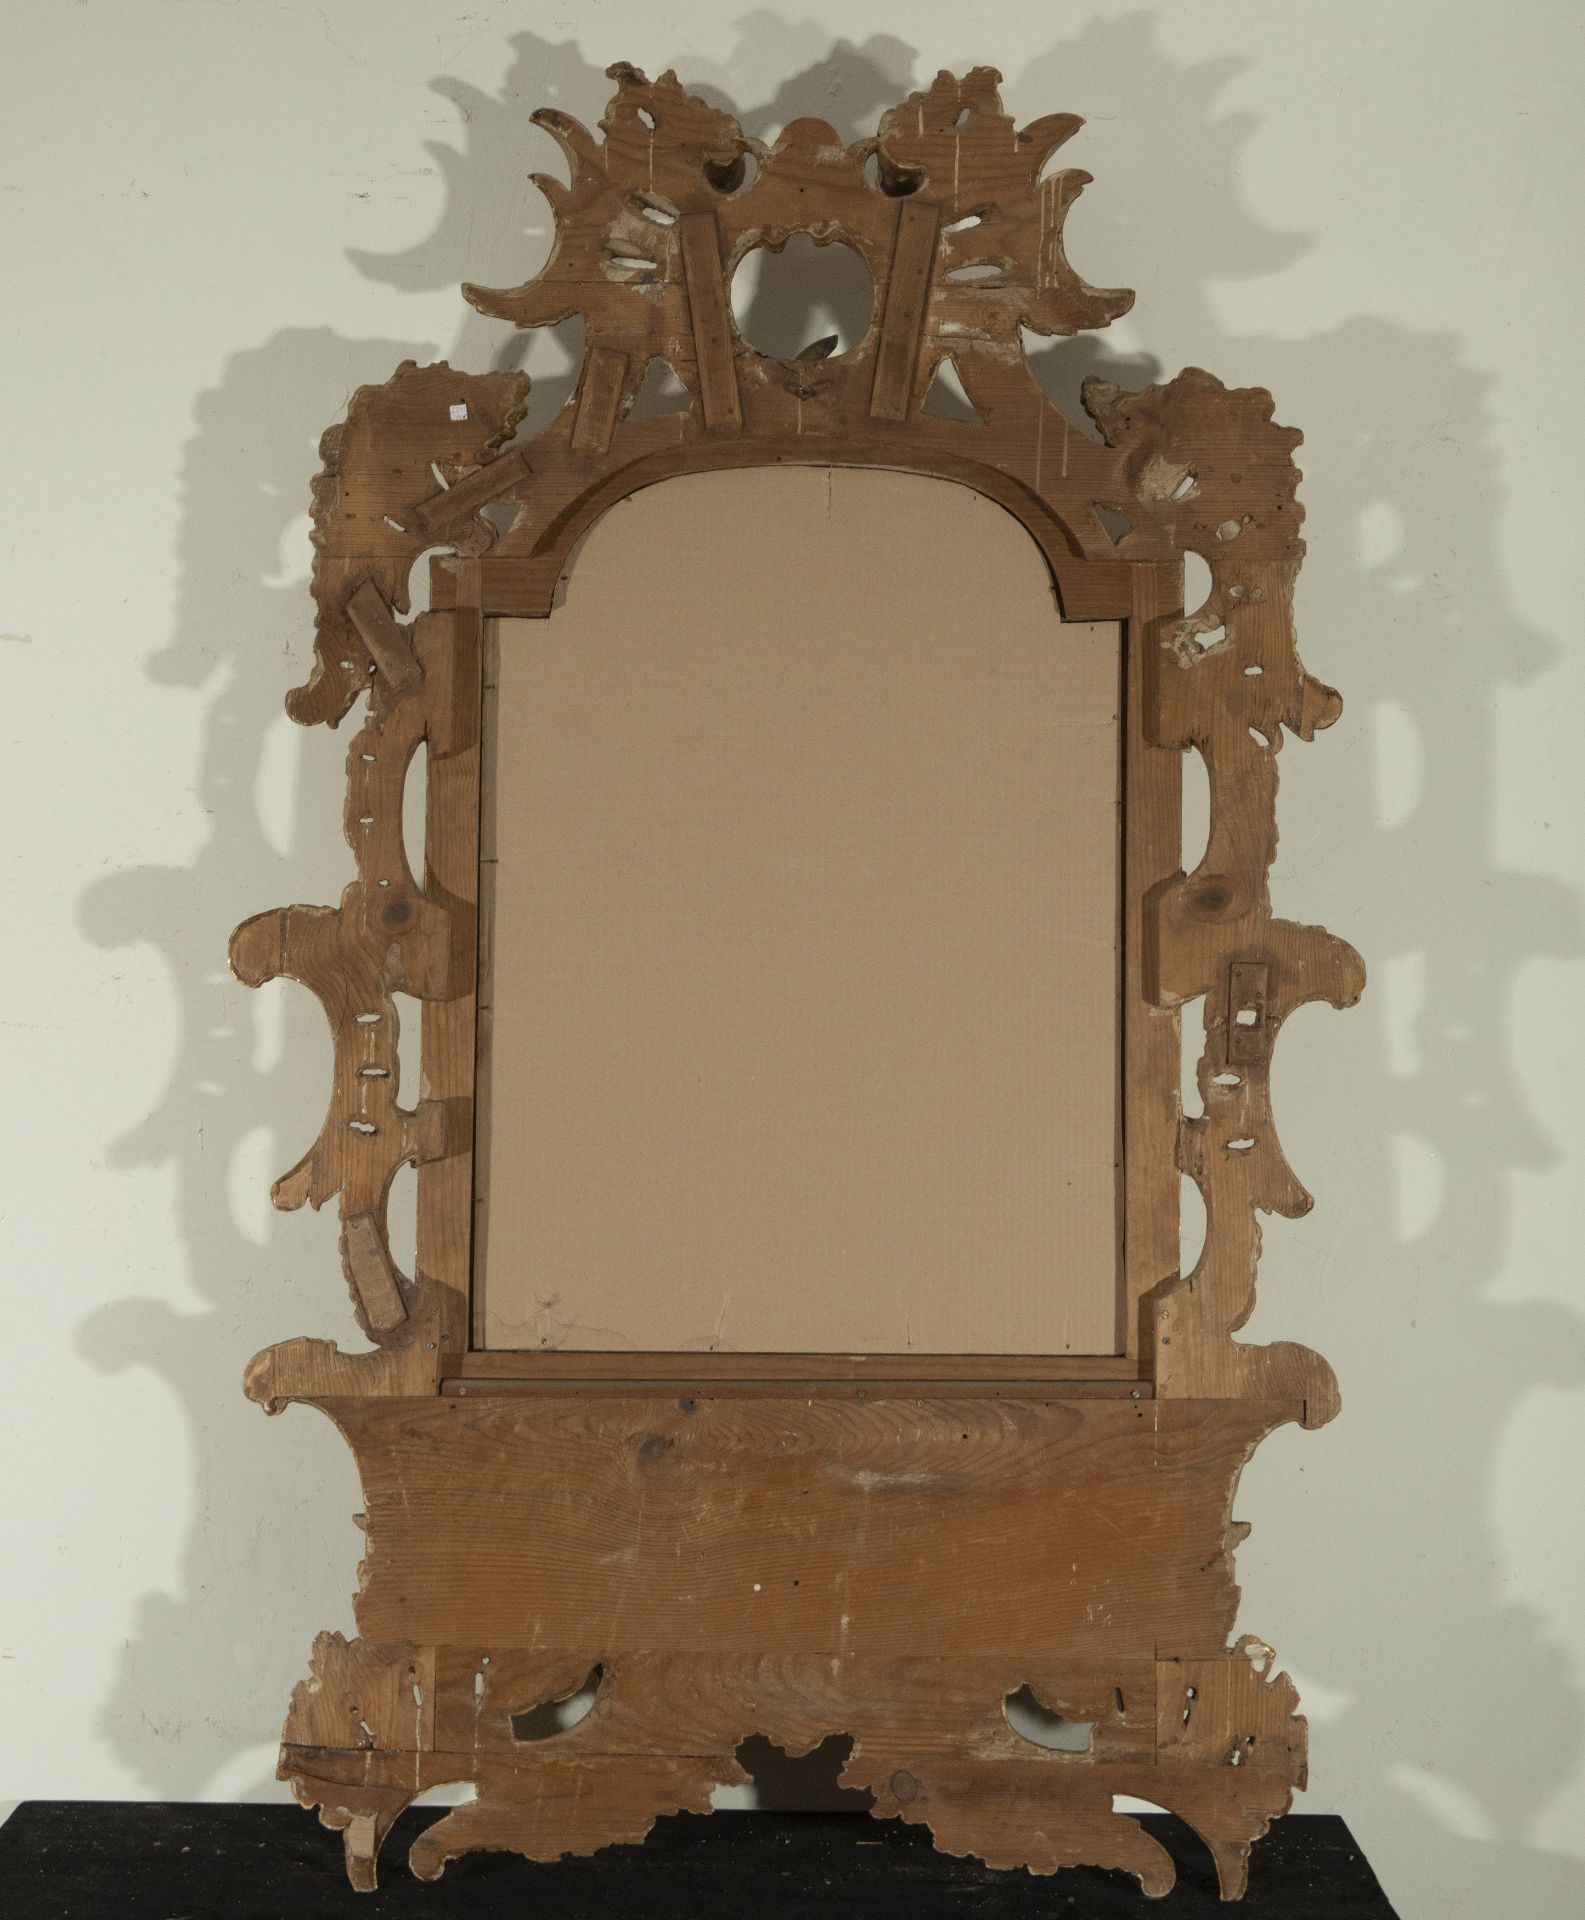 Antique Spanish frame from the 17th century transformed into a carved wood mirror - Image 6 of 6